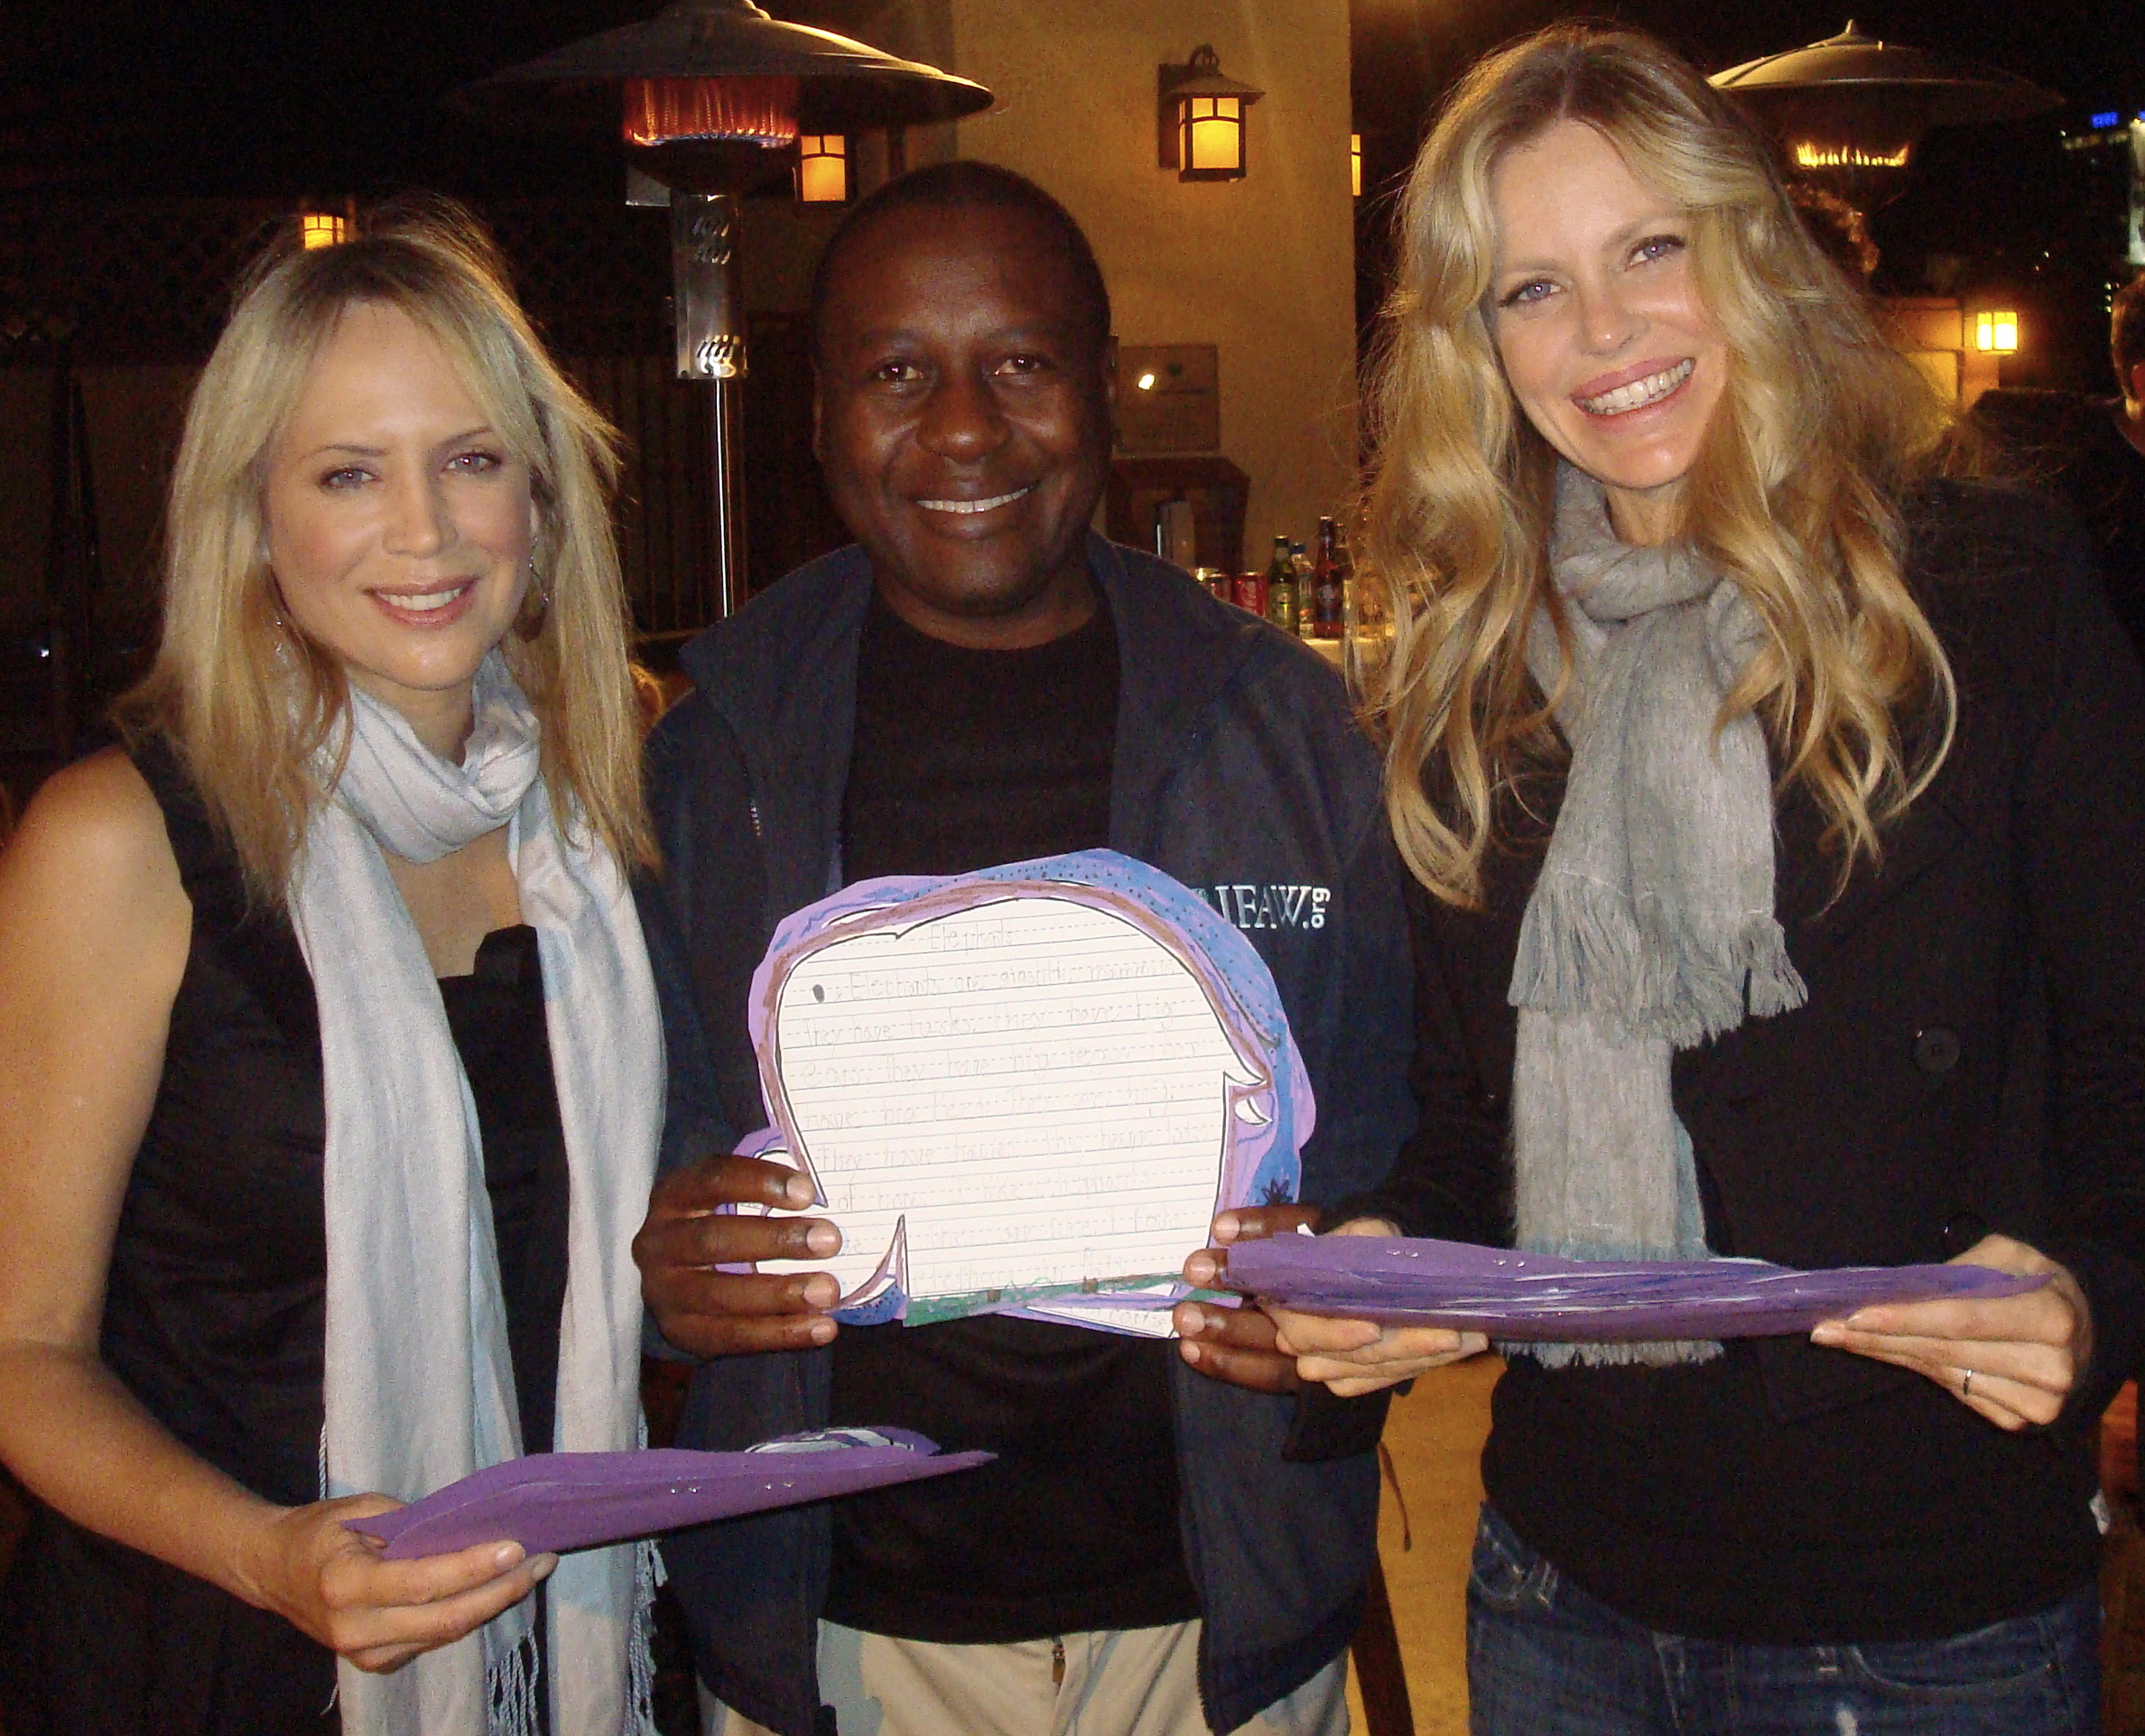 Sherrie Rose, James Isiche, and Kristin Bauer at charity event for IFAW to benefit elephants